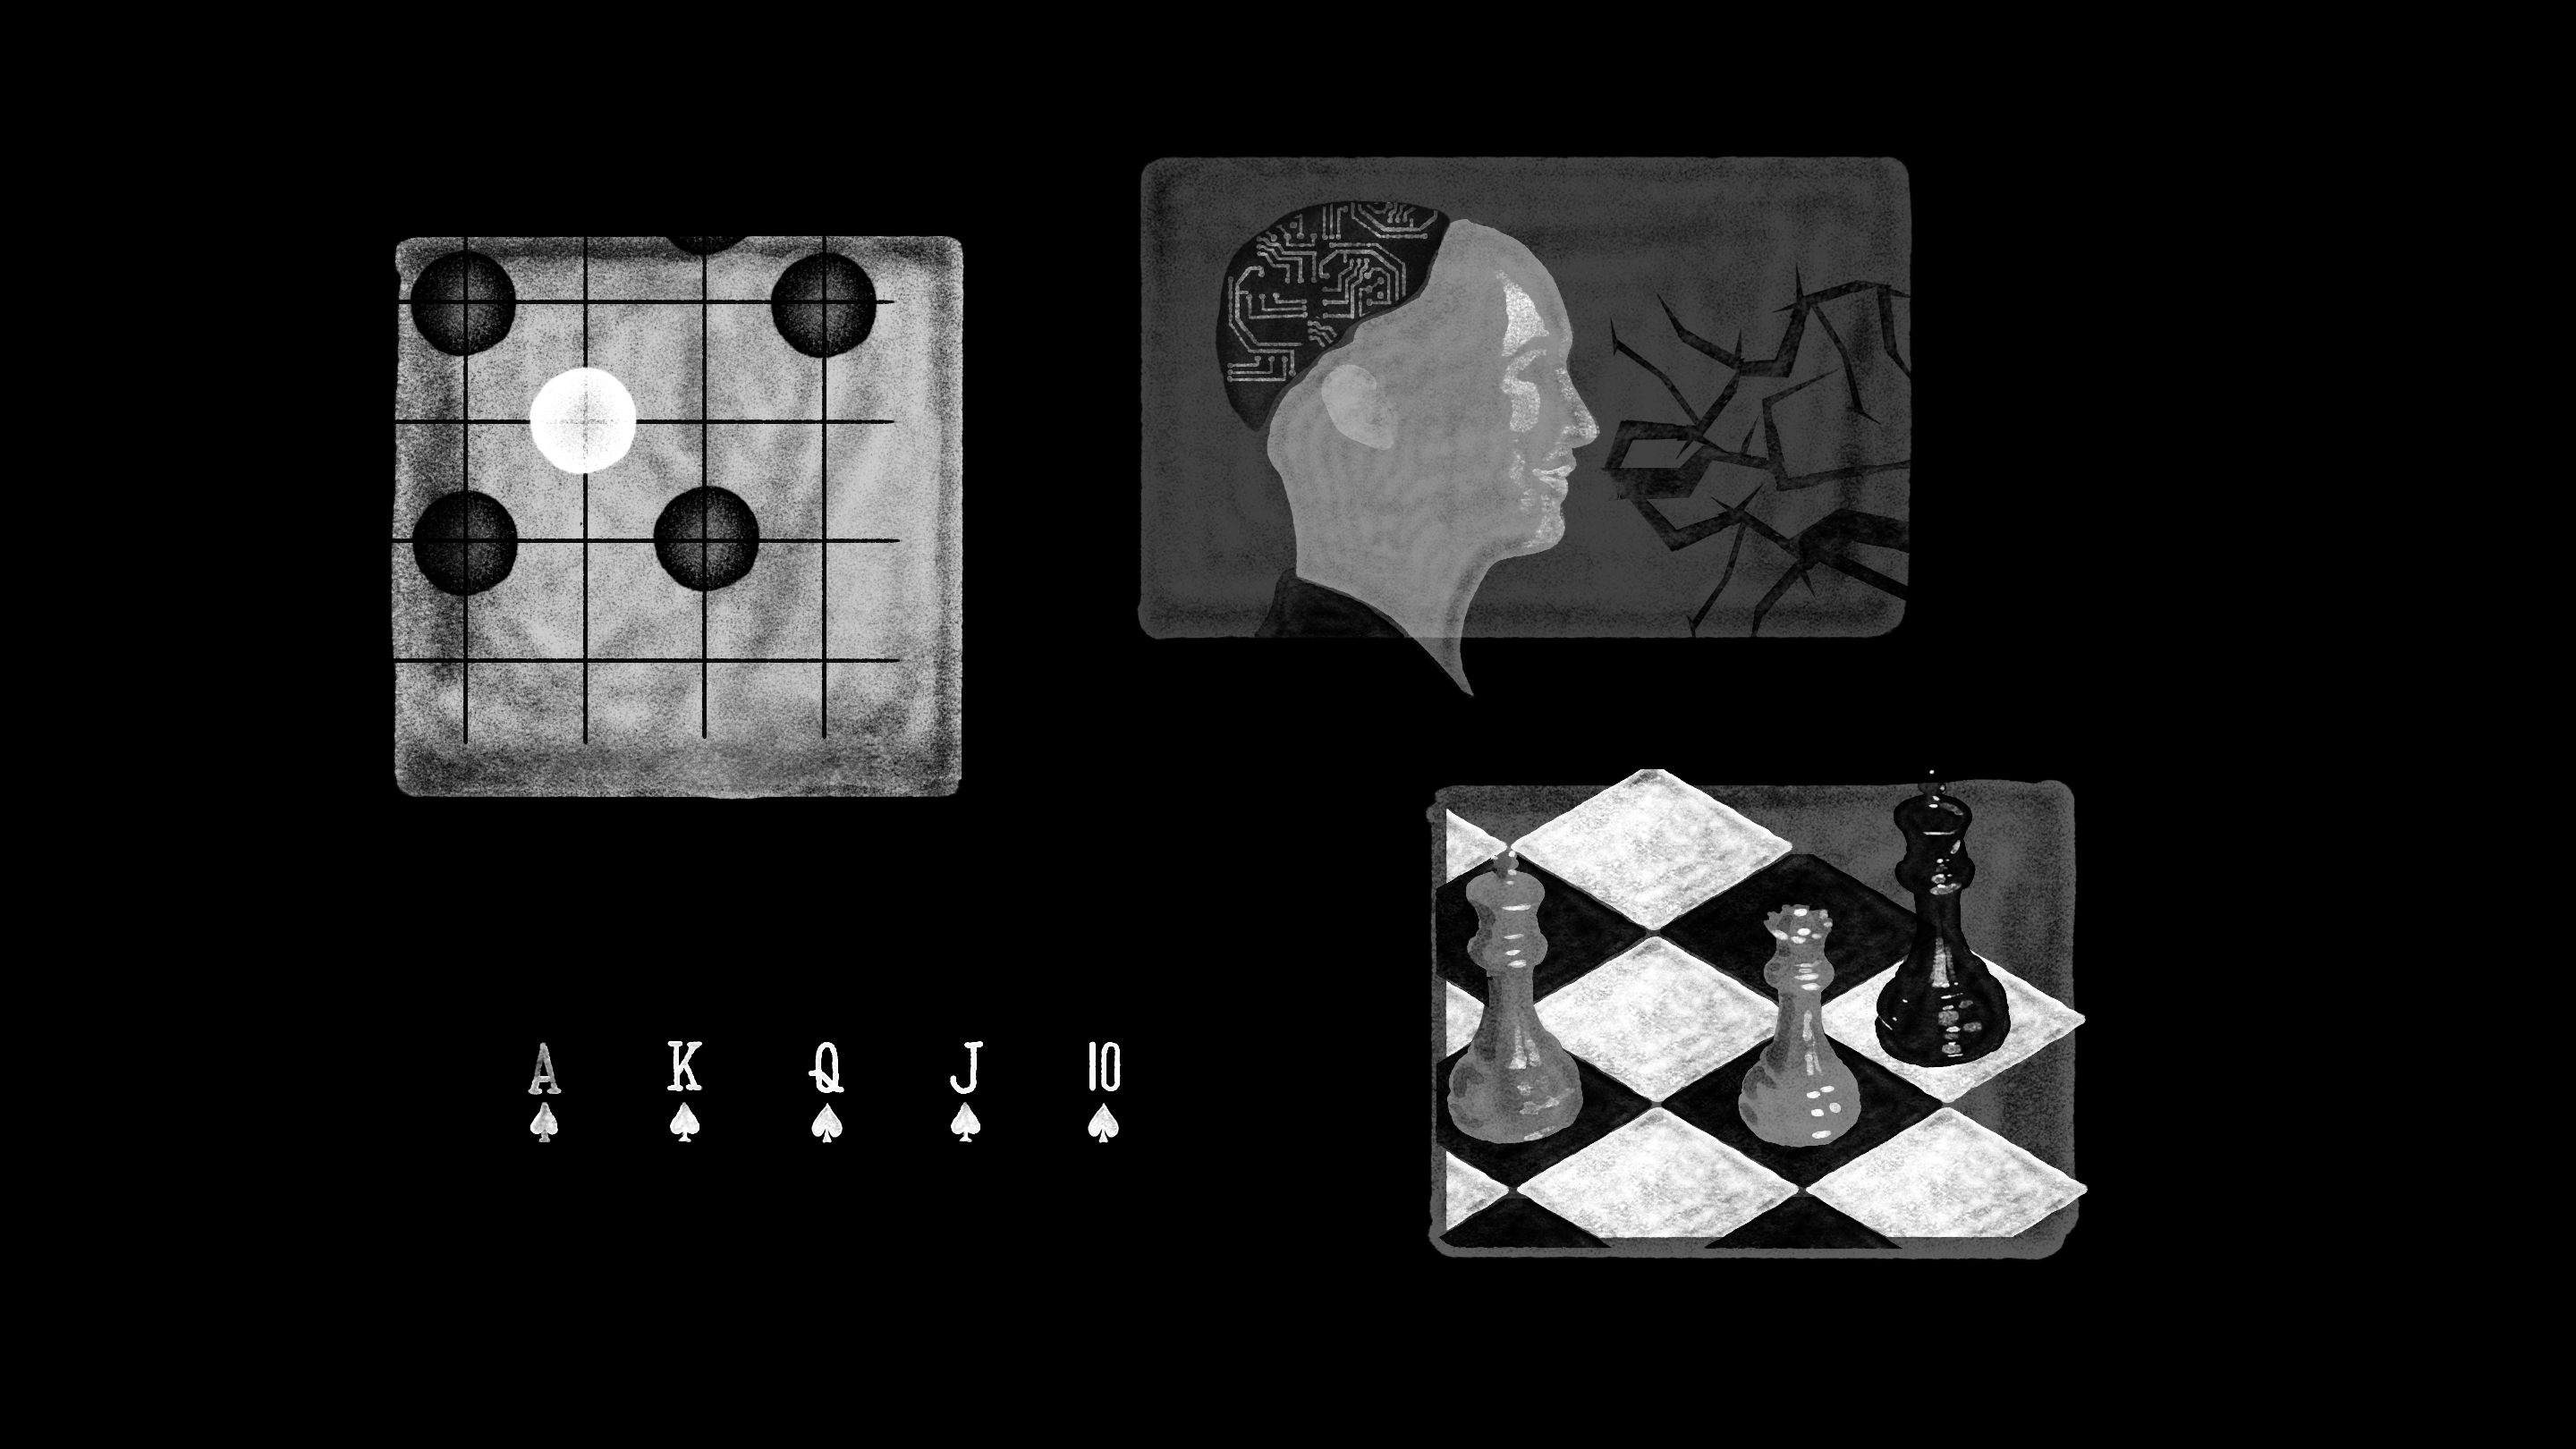 A collage of three images related to games and cognition, featuring a Go board, playing cards, and chess pieces. on right top side of a forth image depicting head of a robot on a shattered background in front of her mouth. 